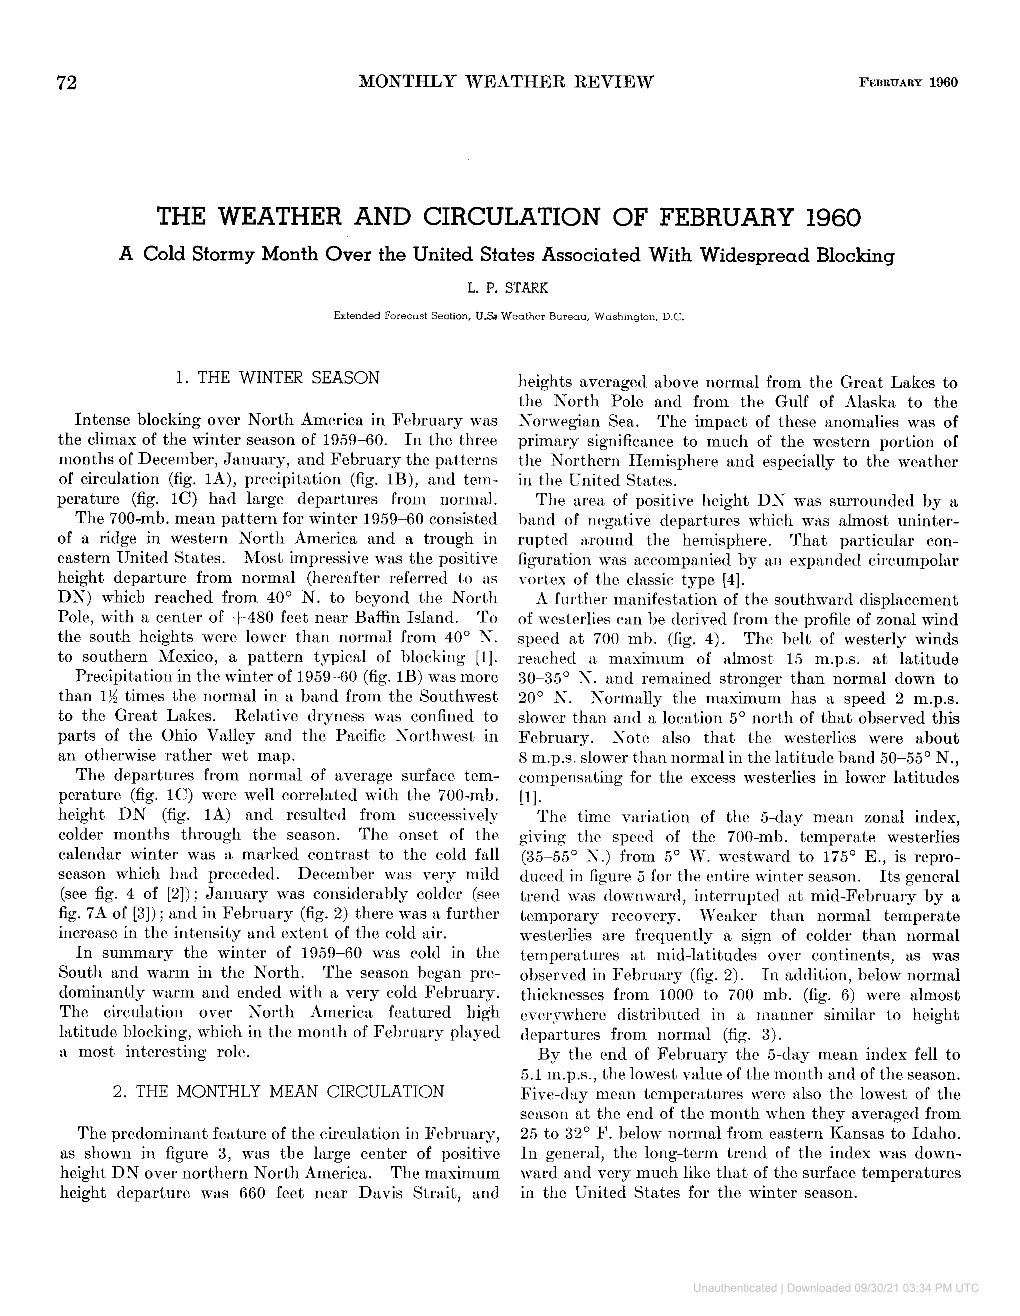 THE WEATHER and CIRCULATION of FEBRUARY 1960 a Cold Stormy Month Over the United States Associated with Widespread Blocking L